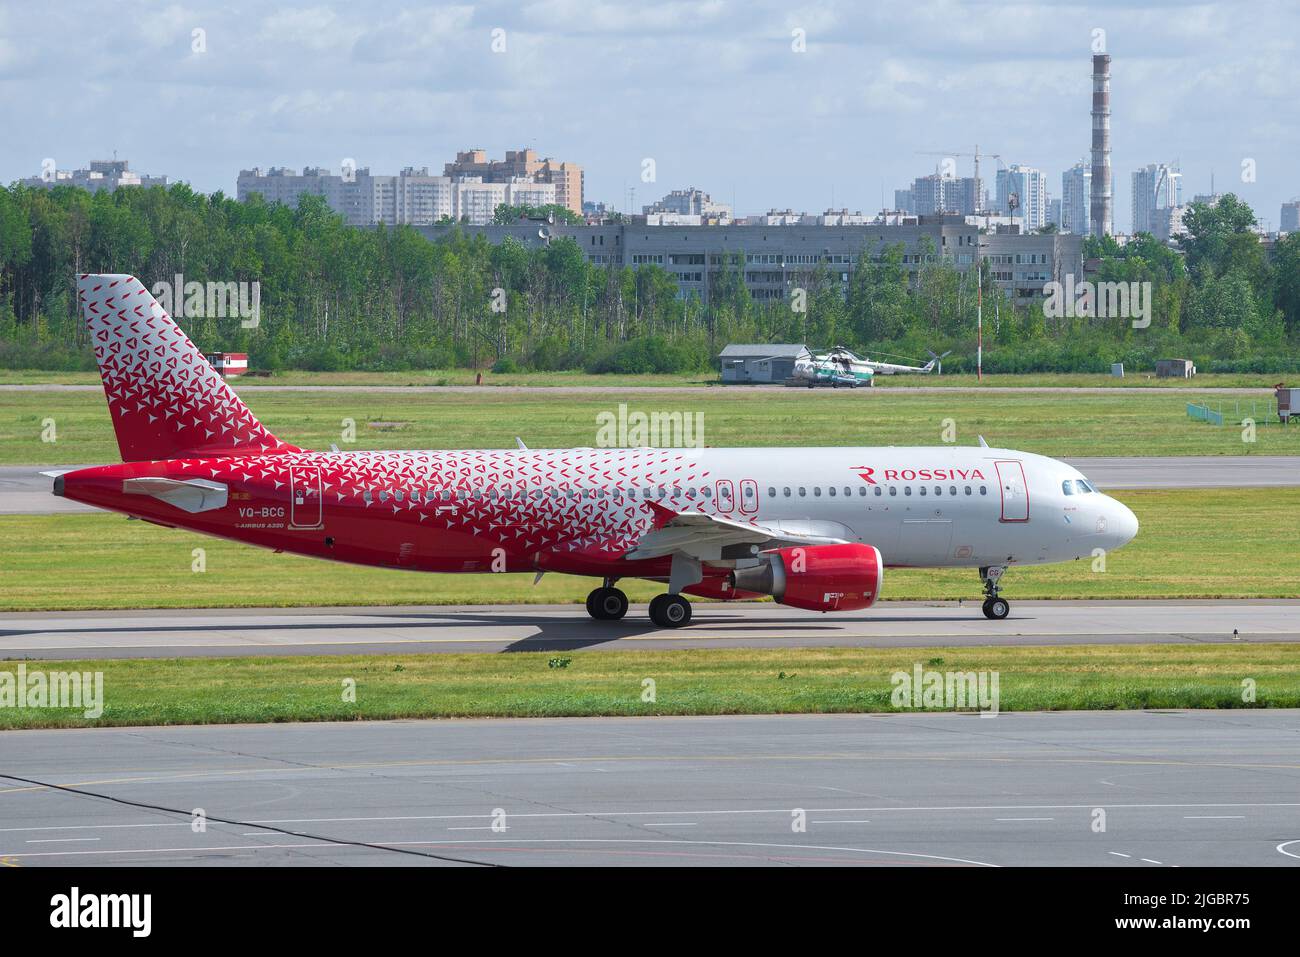 SAINT PETERSBURG, RUSSIA - JUNE 20, 2018: Airbus A320-200 'Kursk' (VQ-BCG) of Rossiya Airlines after landing in Pulkovo airport Stock Photo